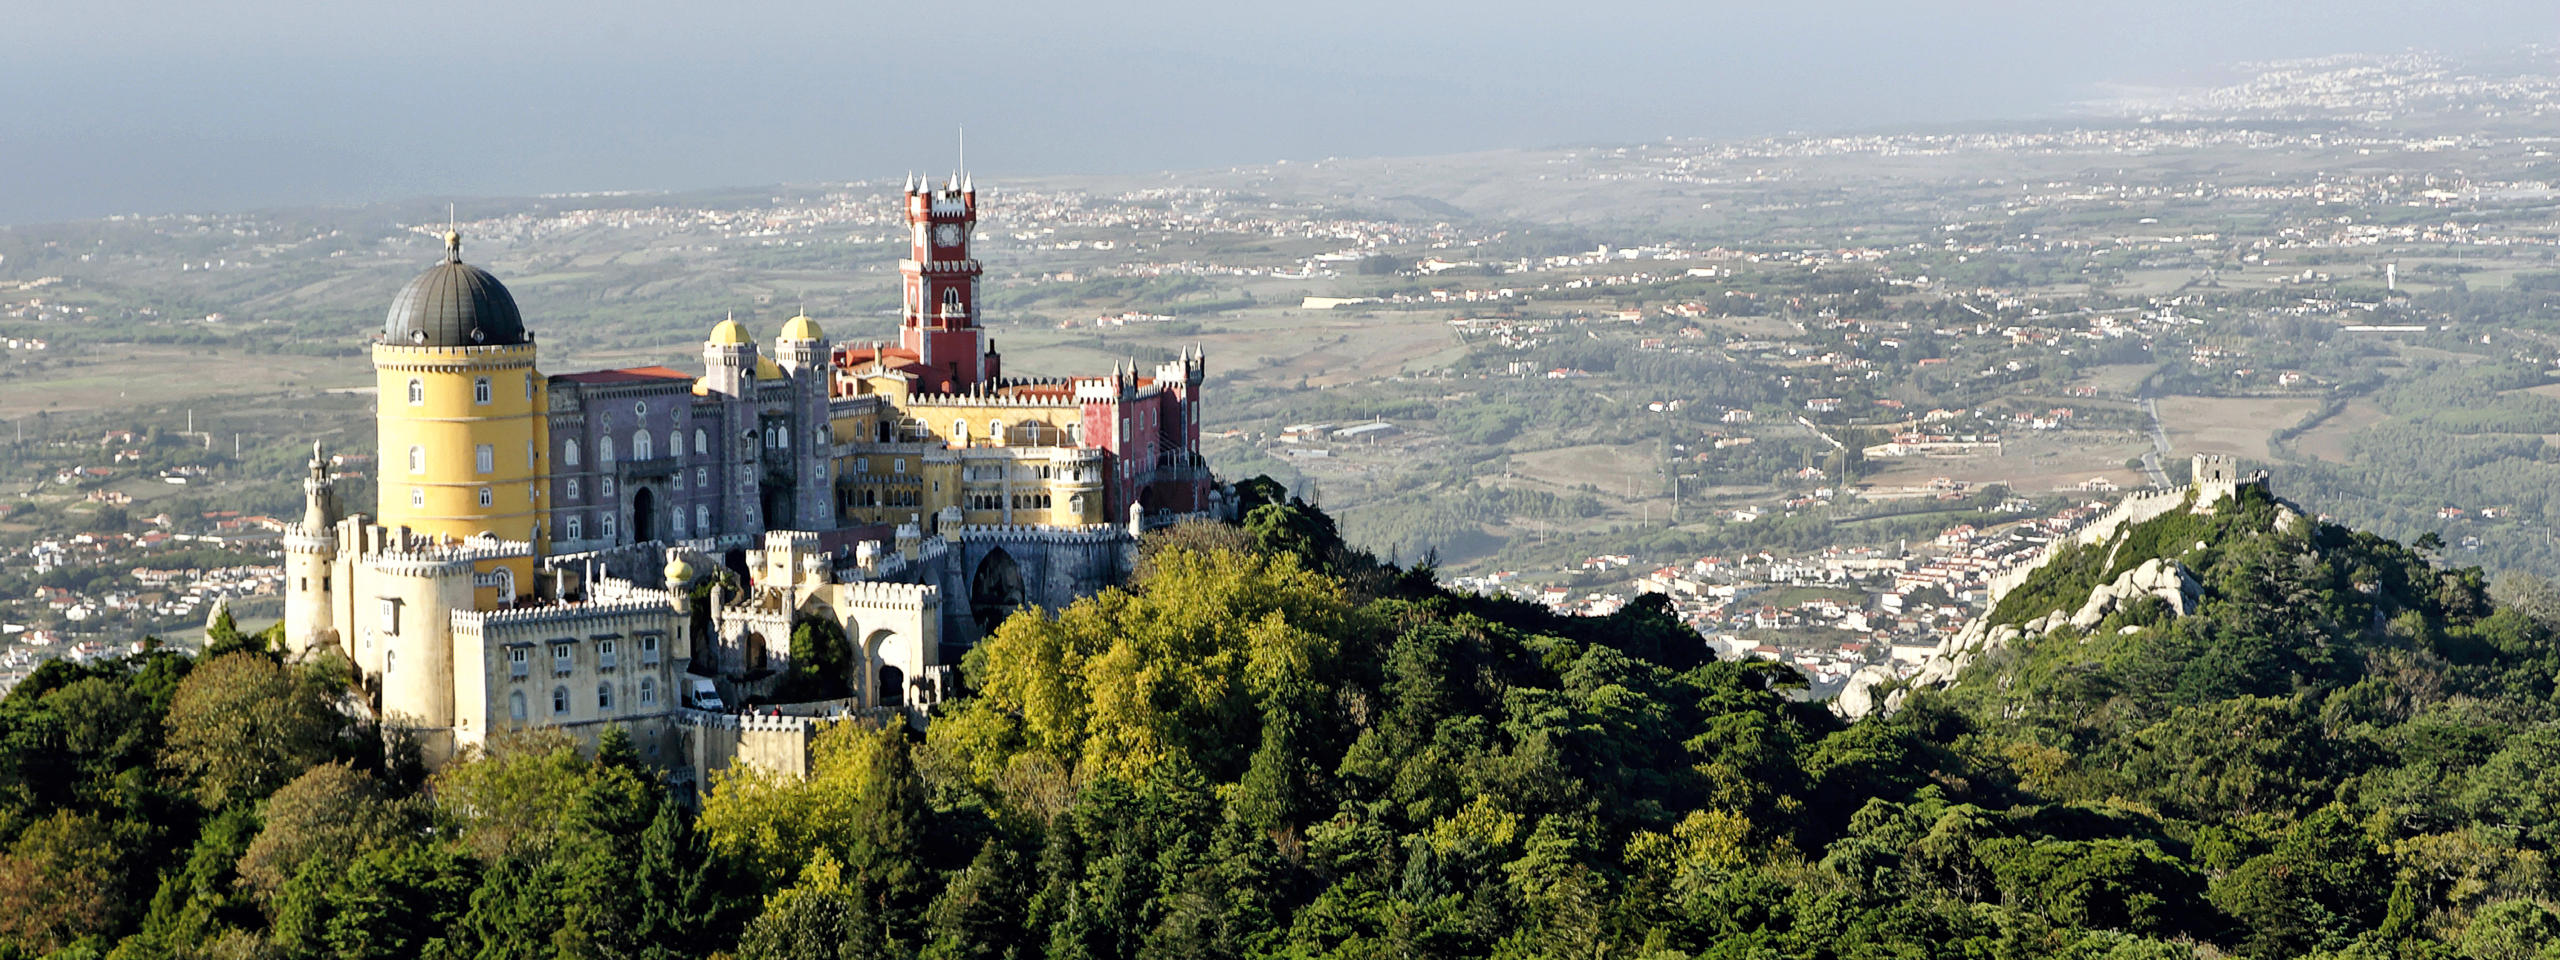 Birdview of Pena palace with the ocean in the background and the Moorish Castle on the right